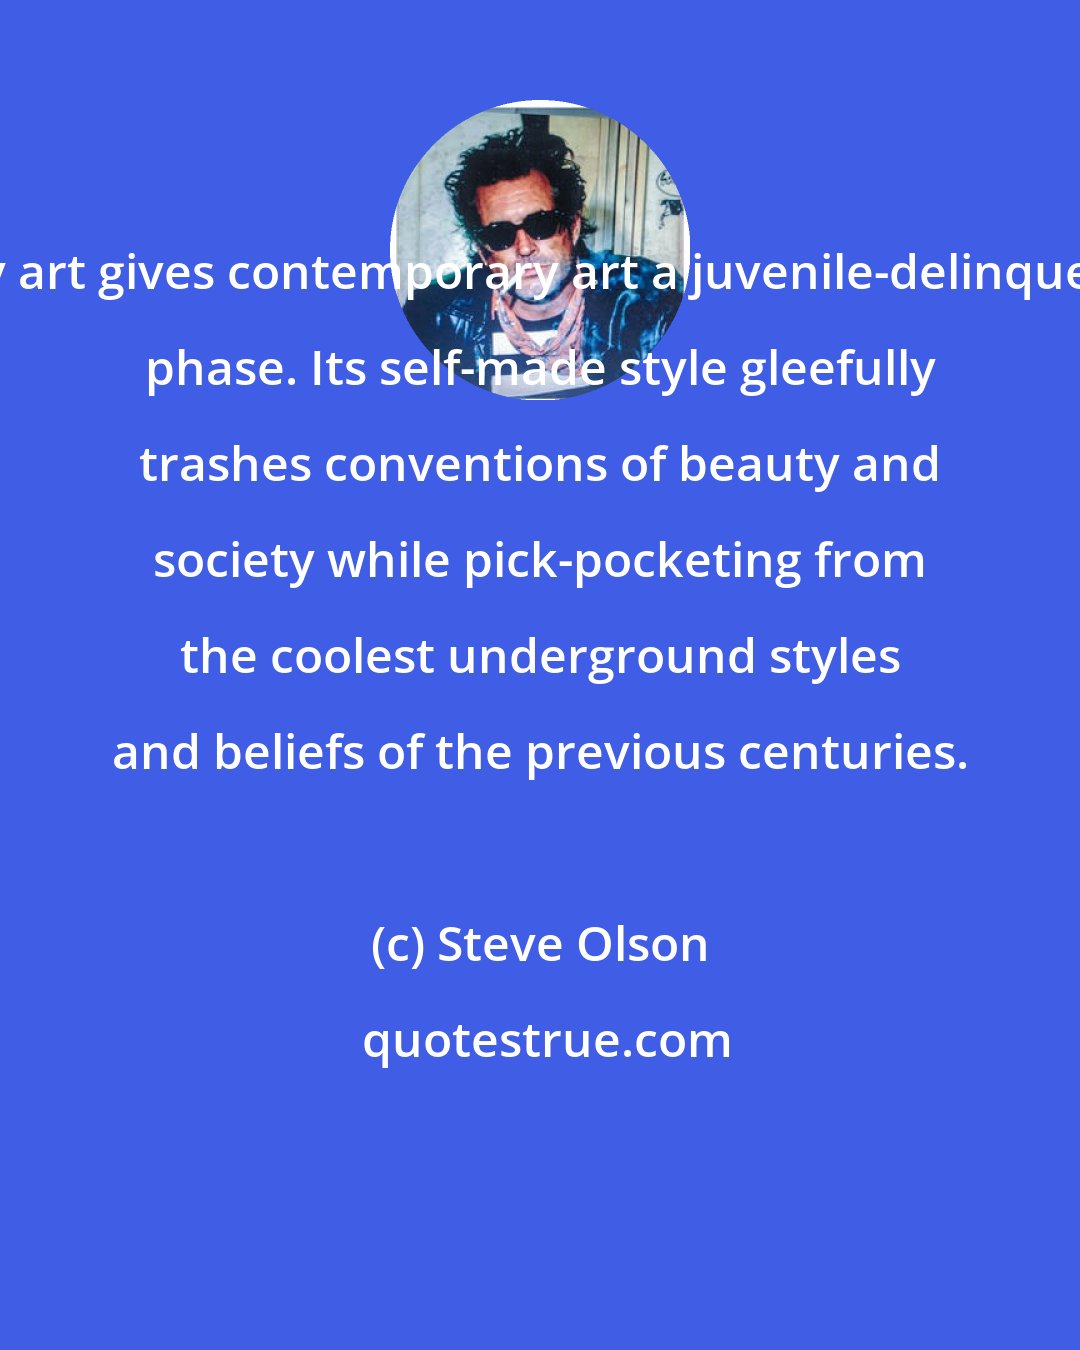 Steve Olson: My art gives contemporary art a juvenile-delinquent phase. Its self-made style gleefully trashes conventions of beauty and society while pick-pocketing from the coolest underground styles and beliefs of the previous centuries.